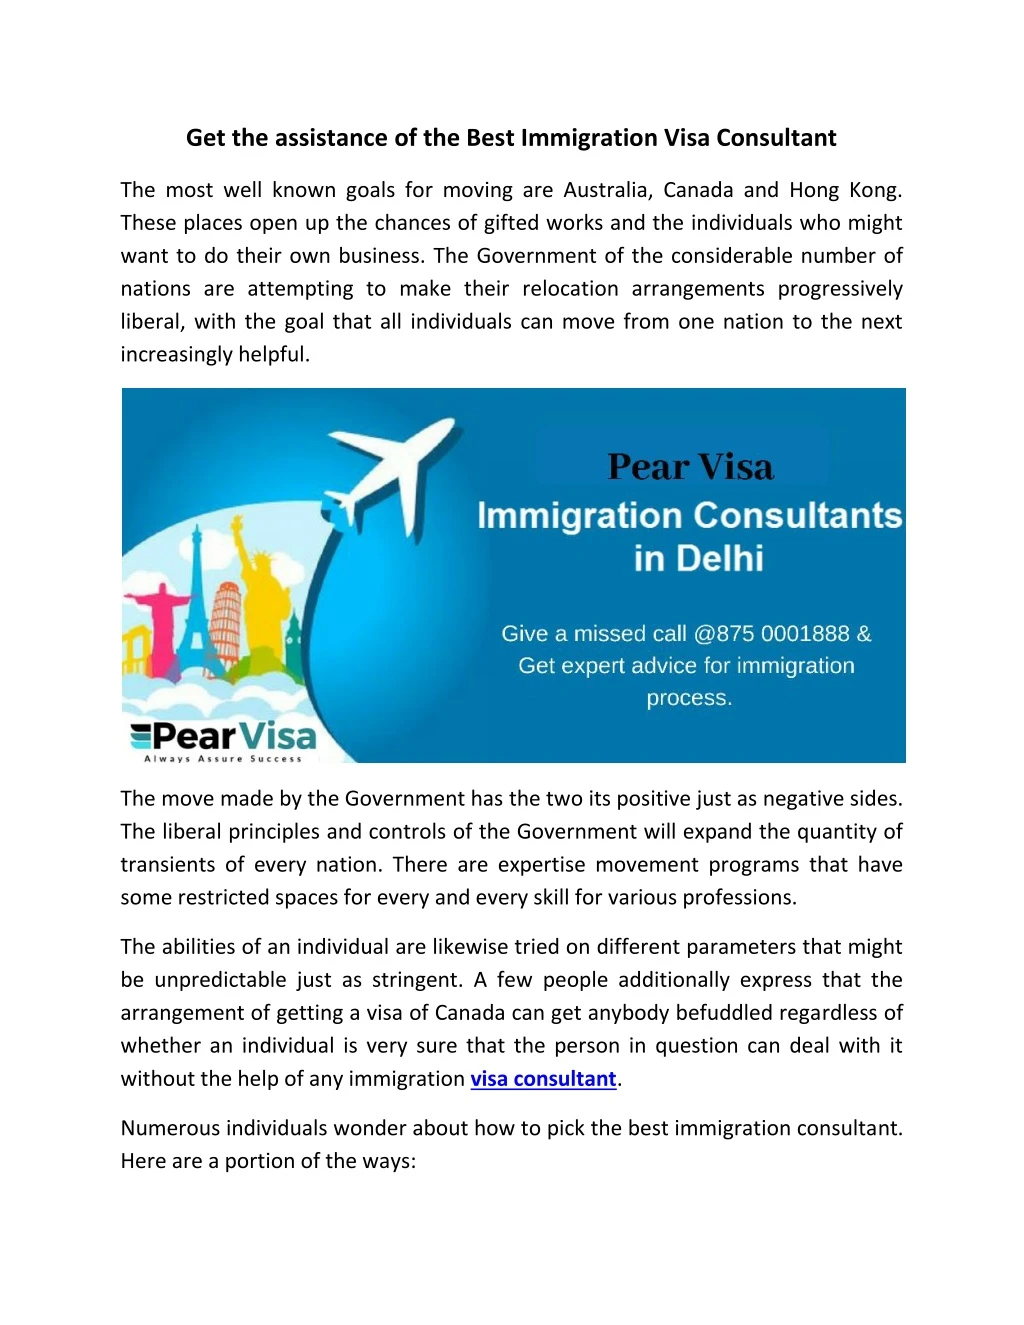 get the assistance of the best immigration visa